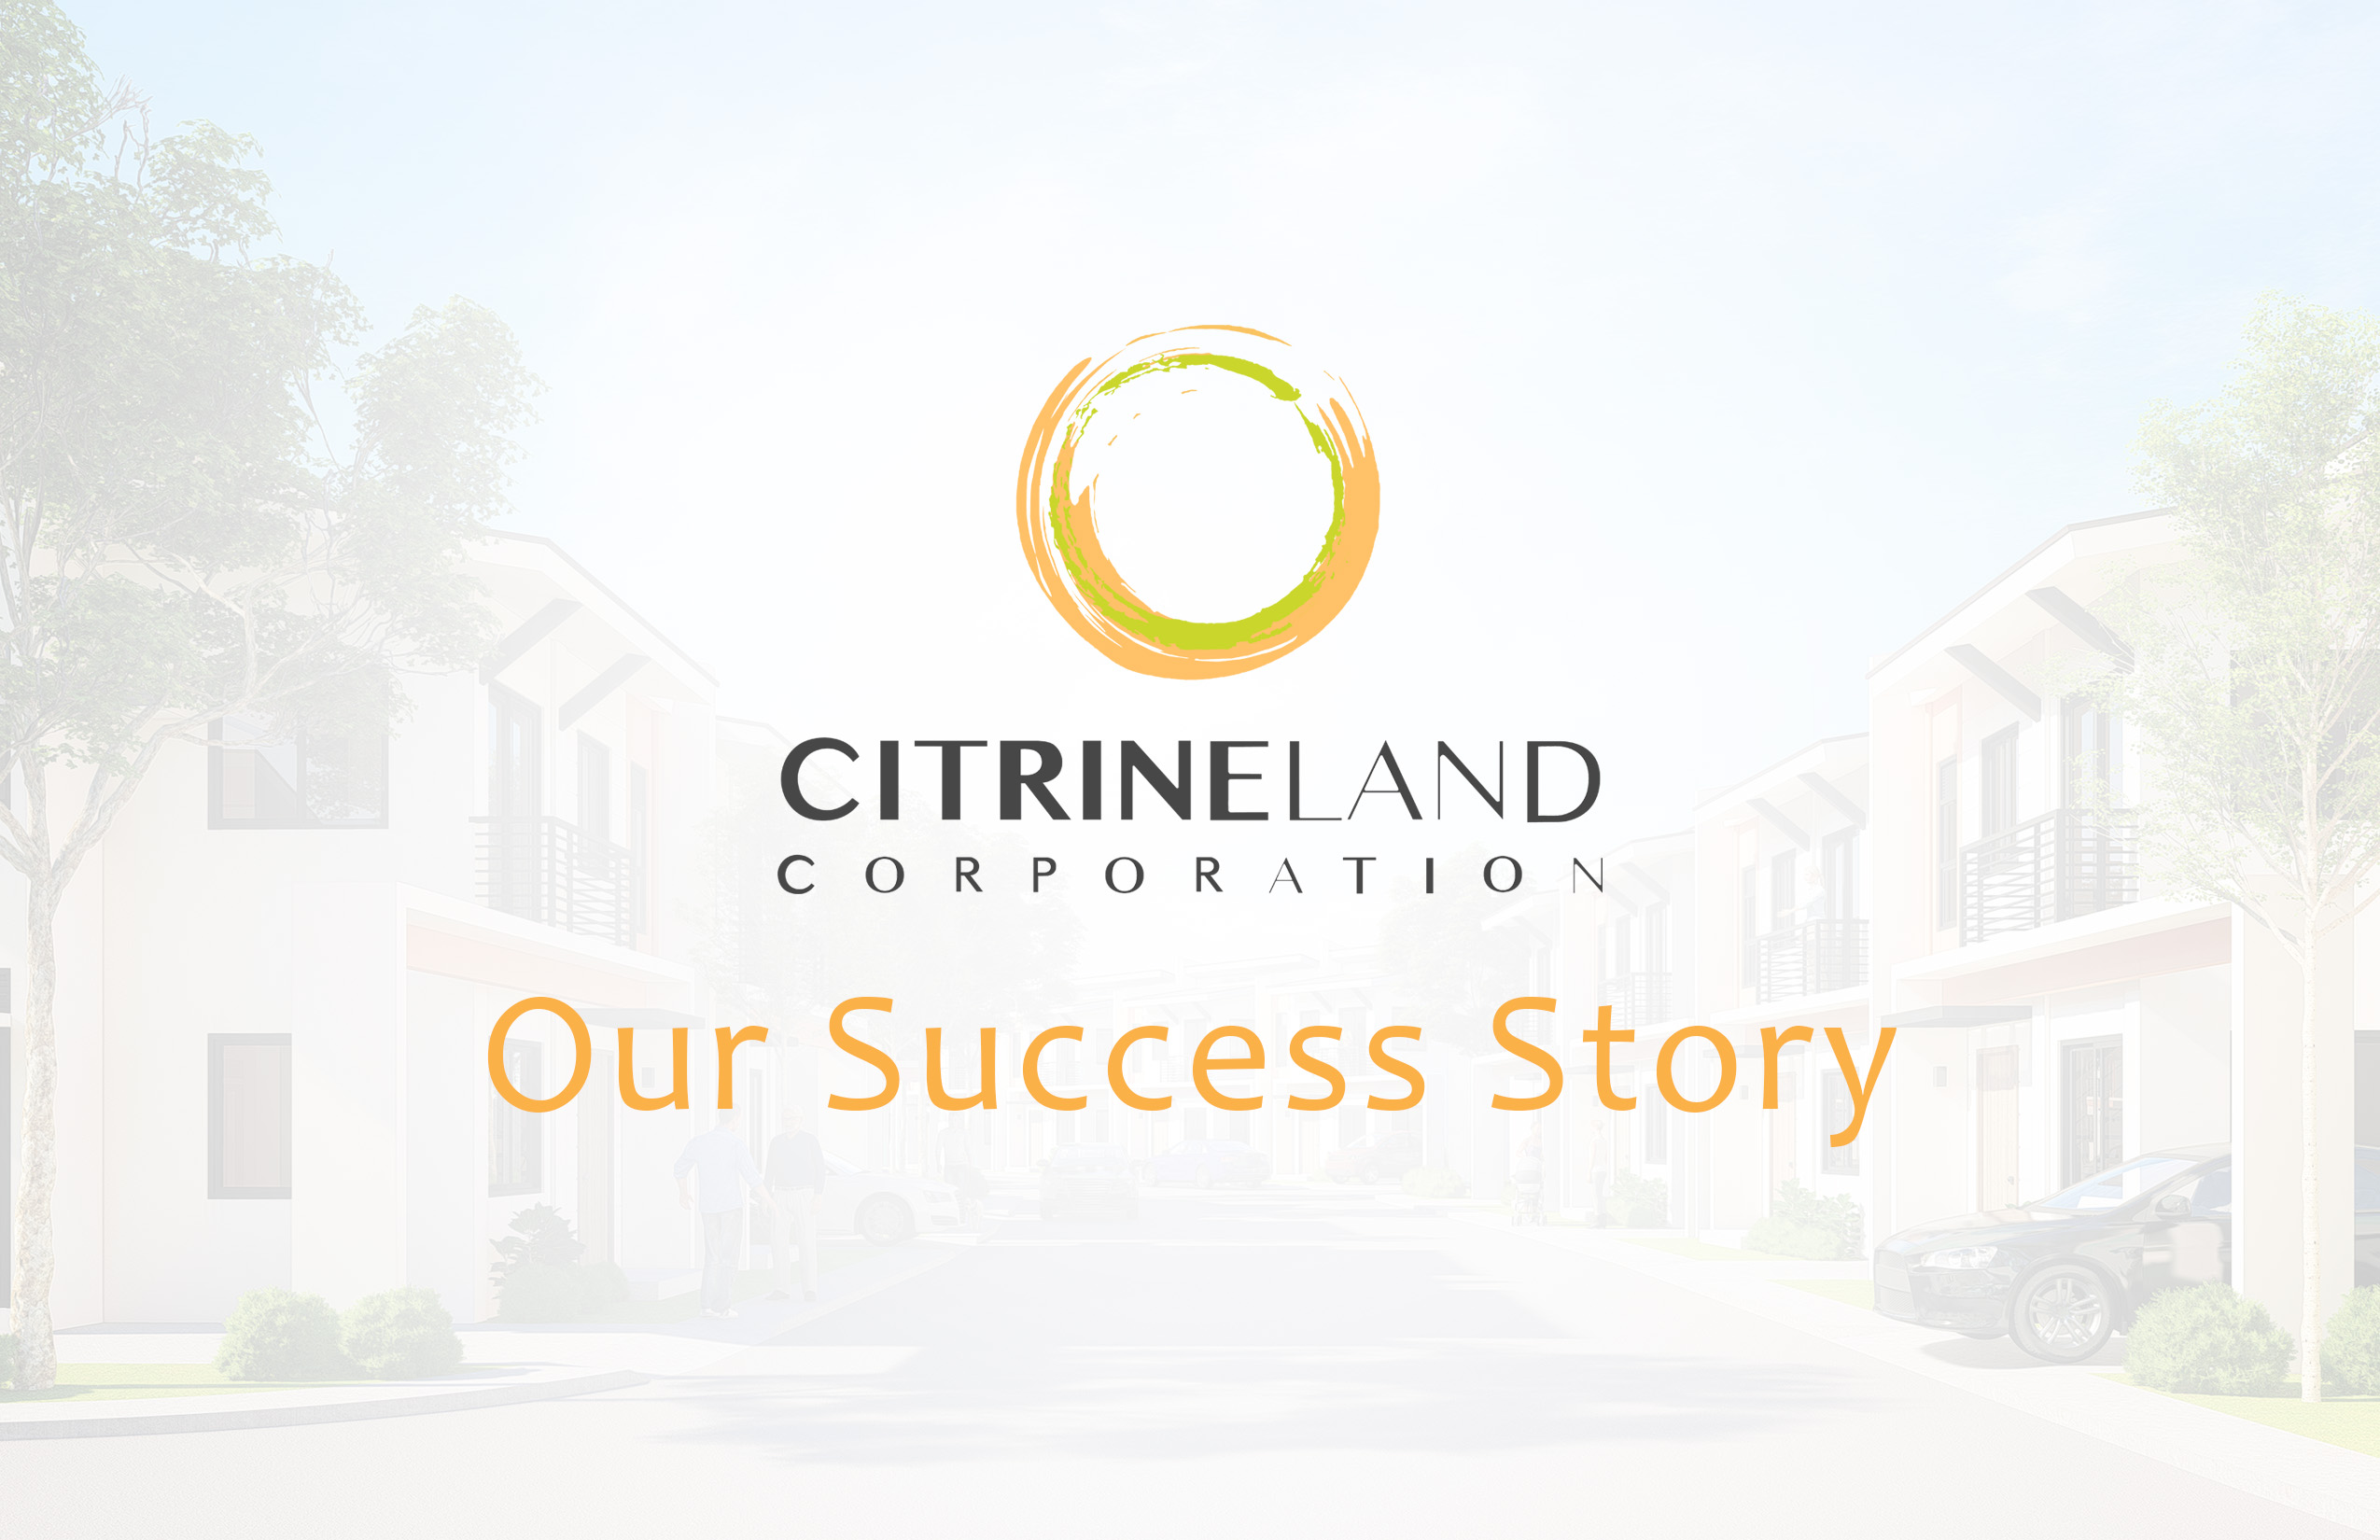 Citrineland Corporation: Four Aspects That Stitched Our Success Story